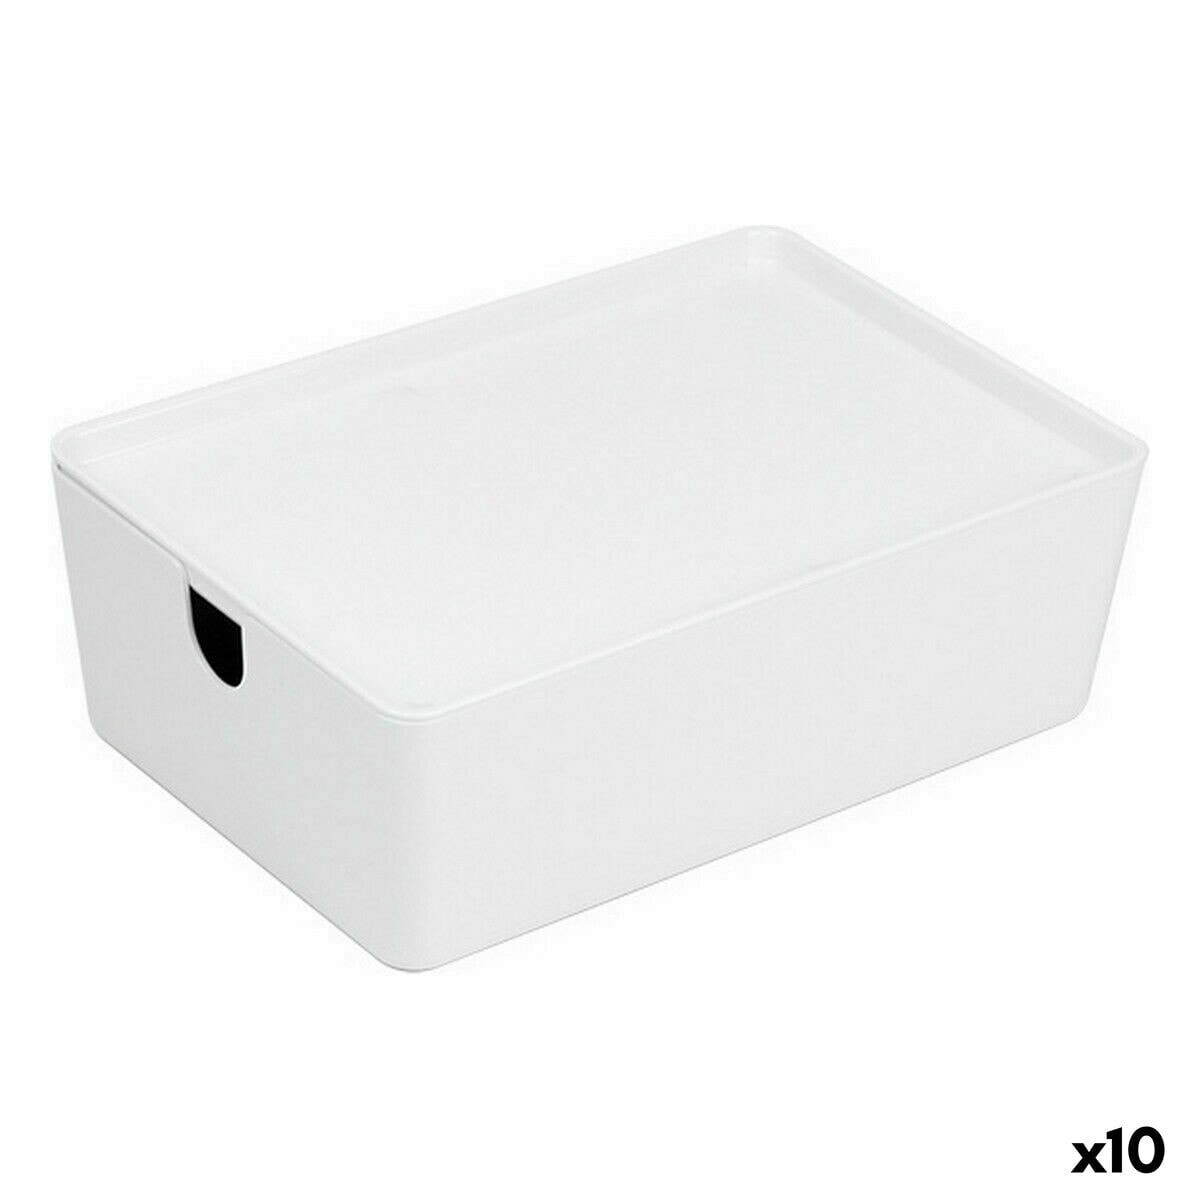 Stackable Organising Box Confortime With lid 26 x 17,5 x 8,5 cm (10 Units)